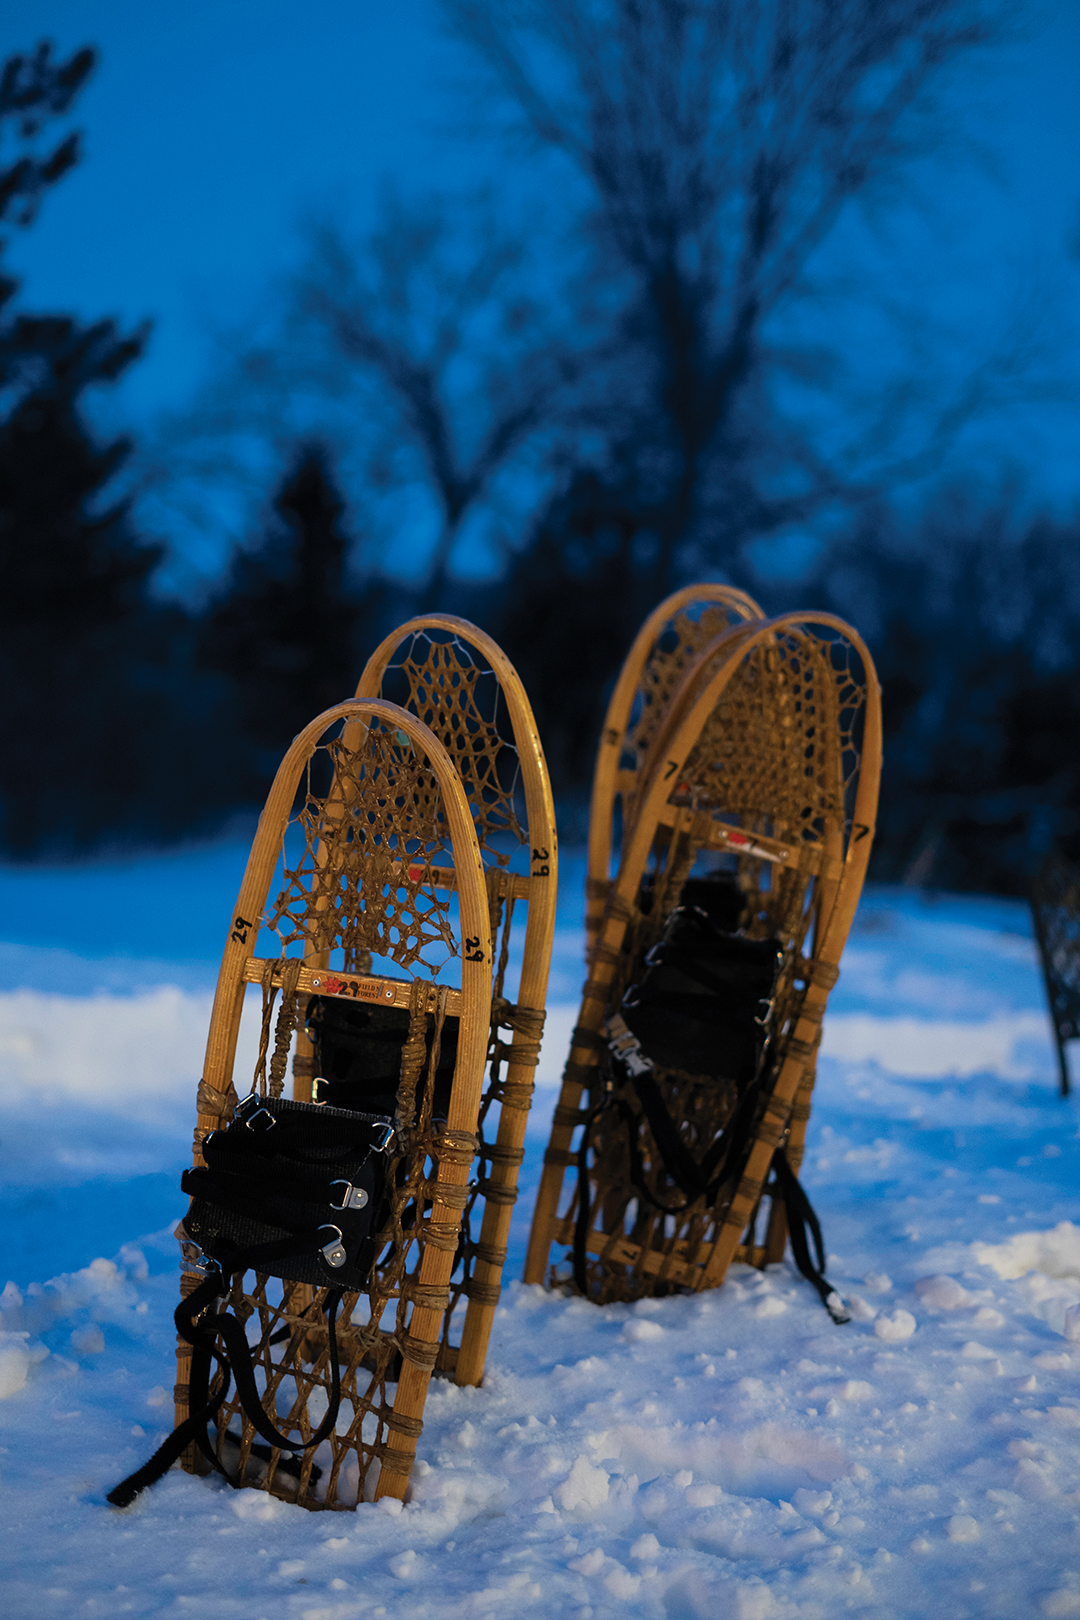 Traditional wooden snowshoes standing up in the snow at dusk, Minnesota, USA